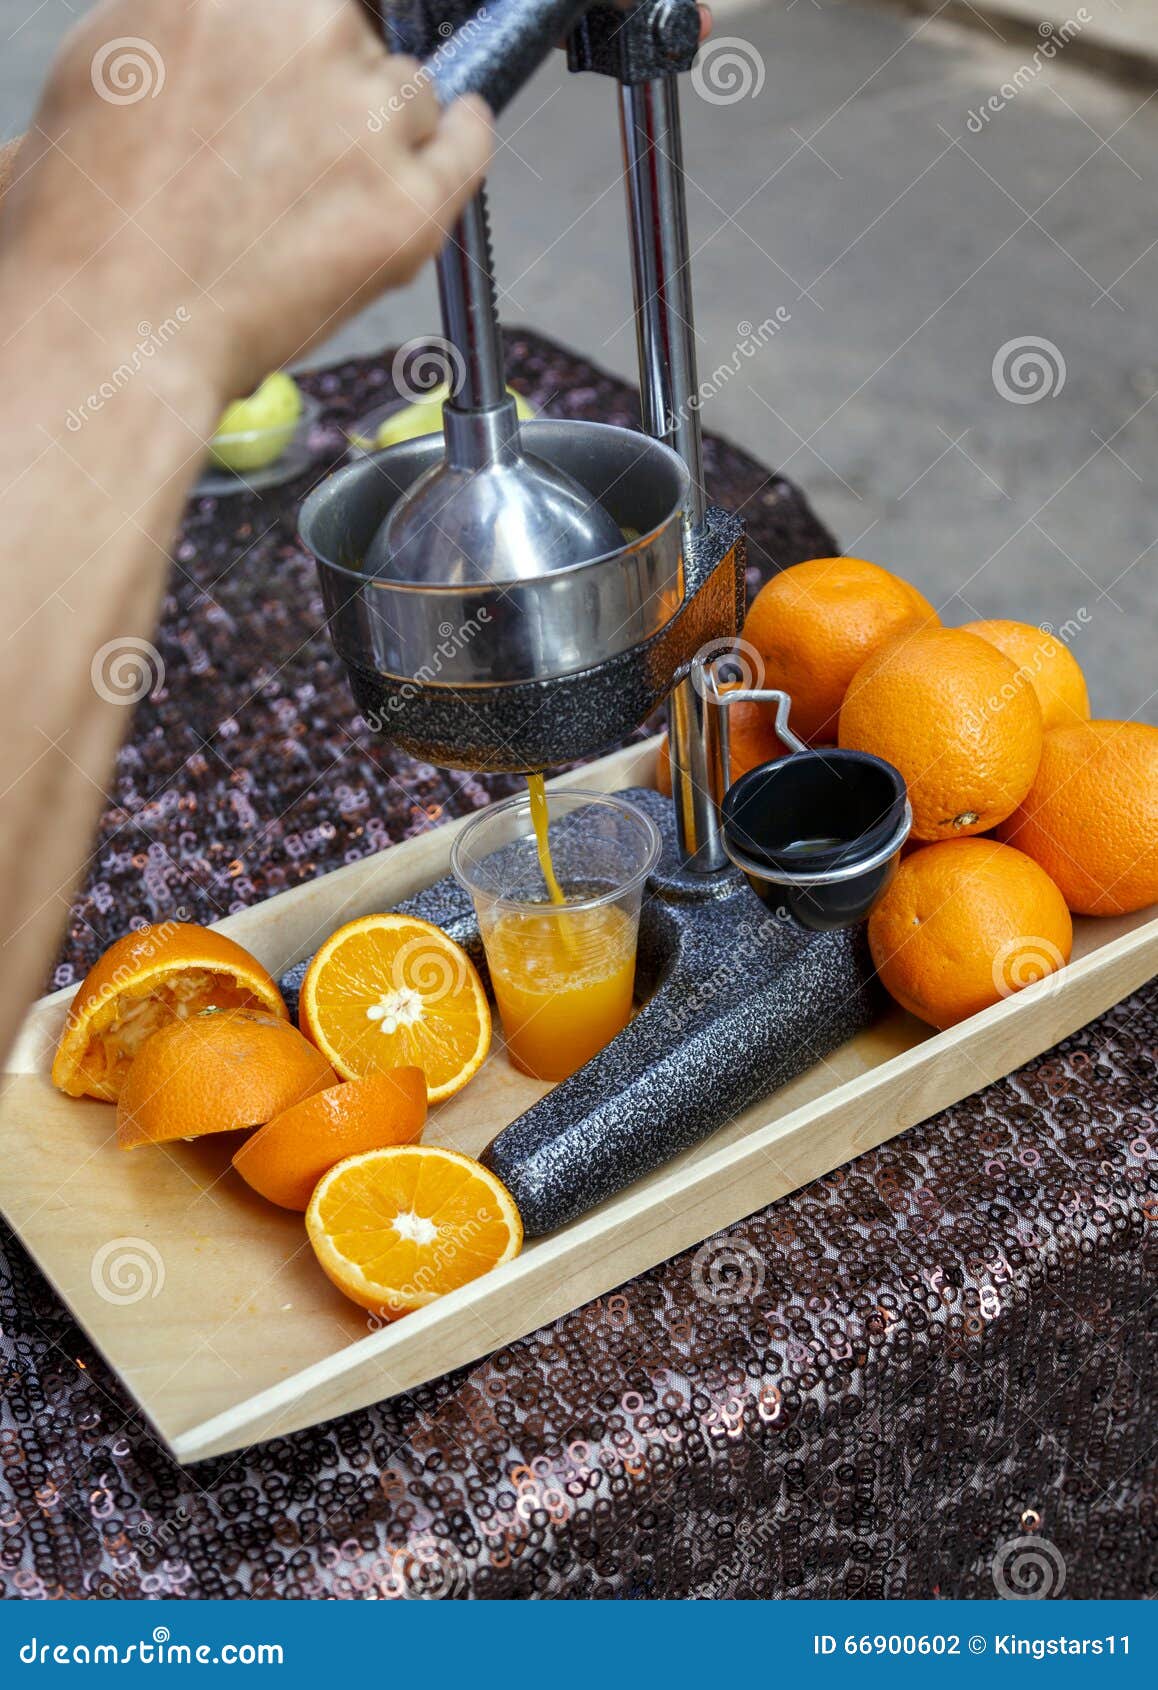 old metal fruit vegetable juice press squeeze machine street vendor with  fruit photographed in Istanbul Turkey Sultanahmet Stock Photo - Alamy